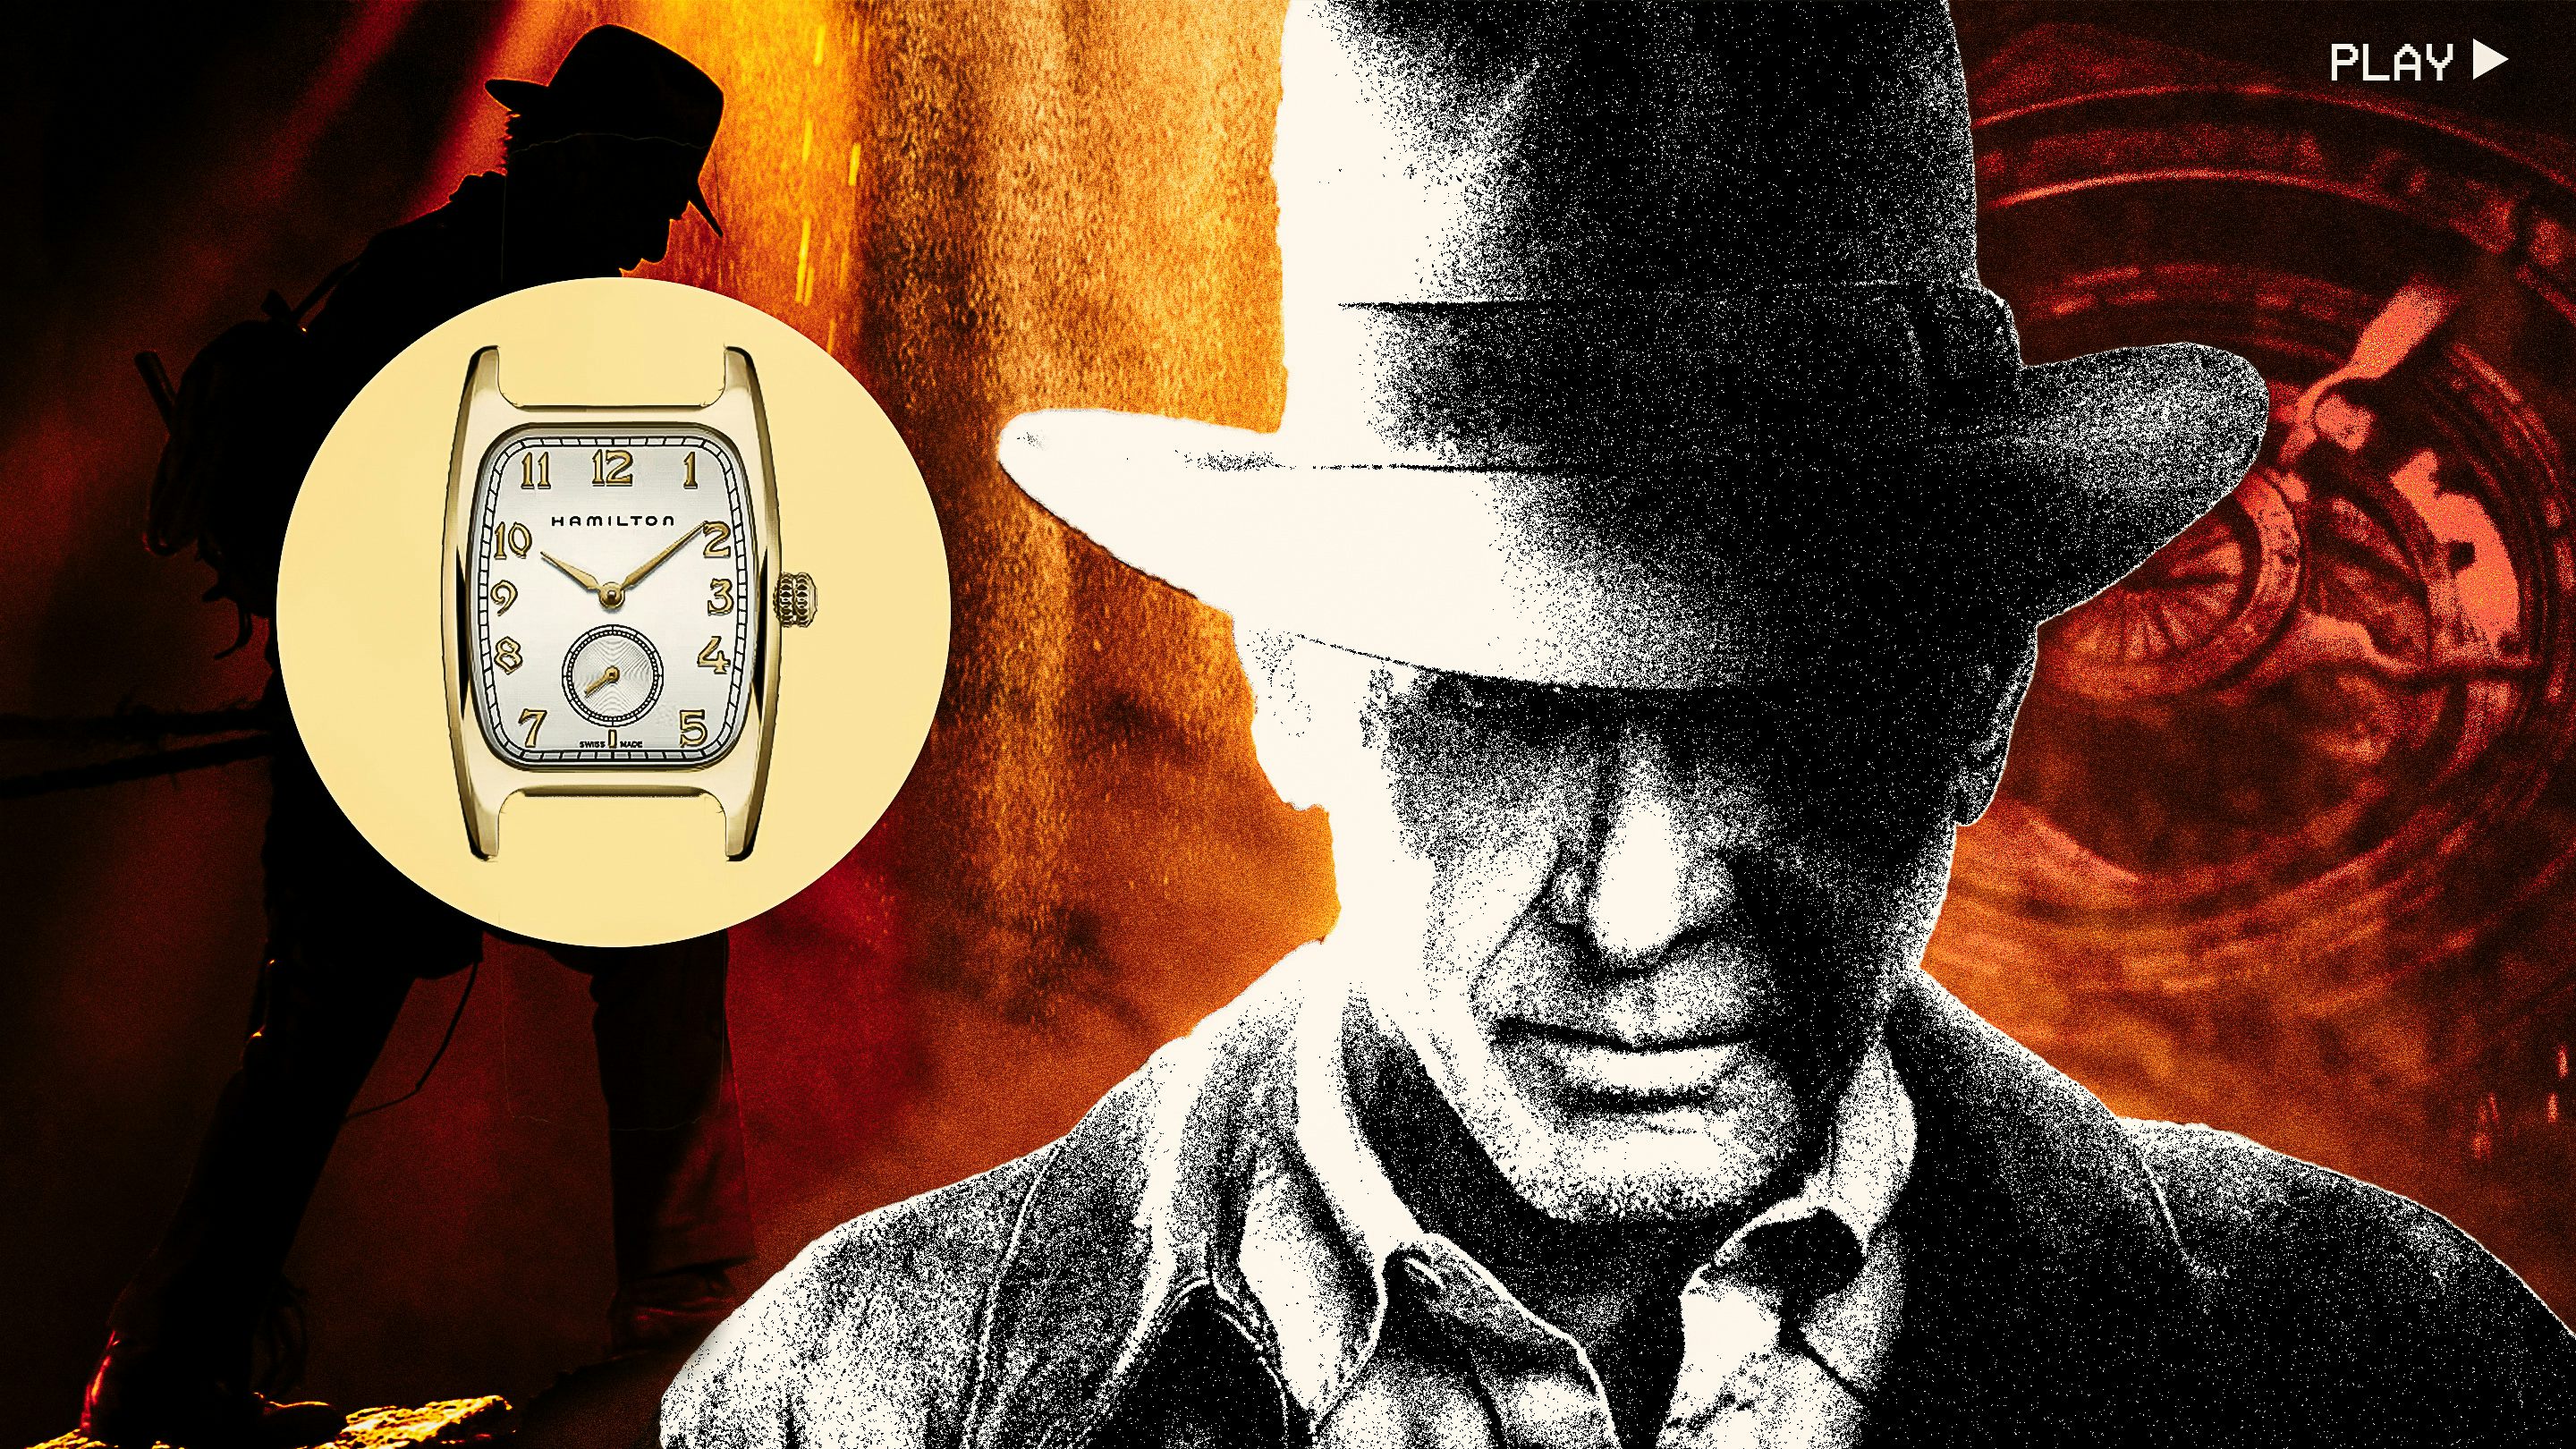 Harrison Ford to play Indiana Jones one last time